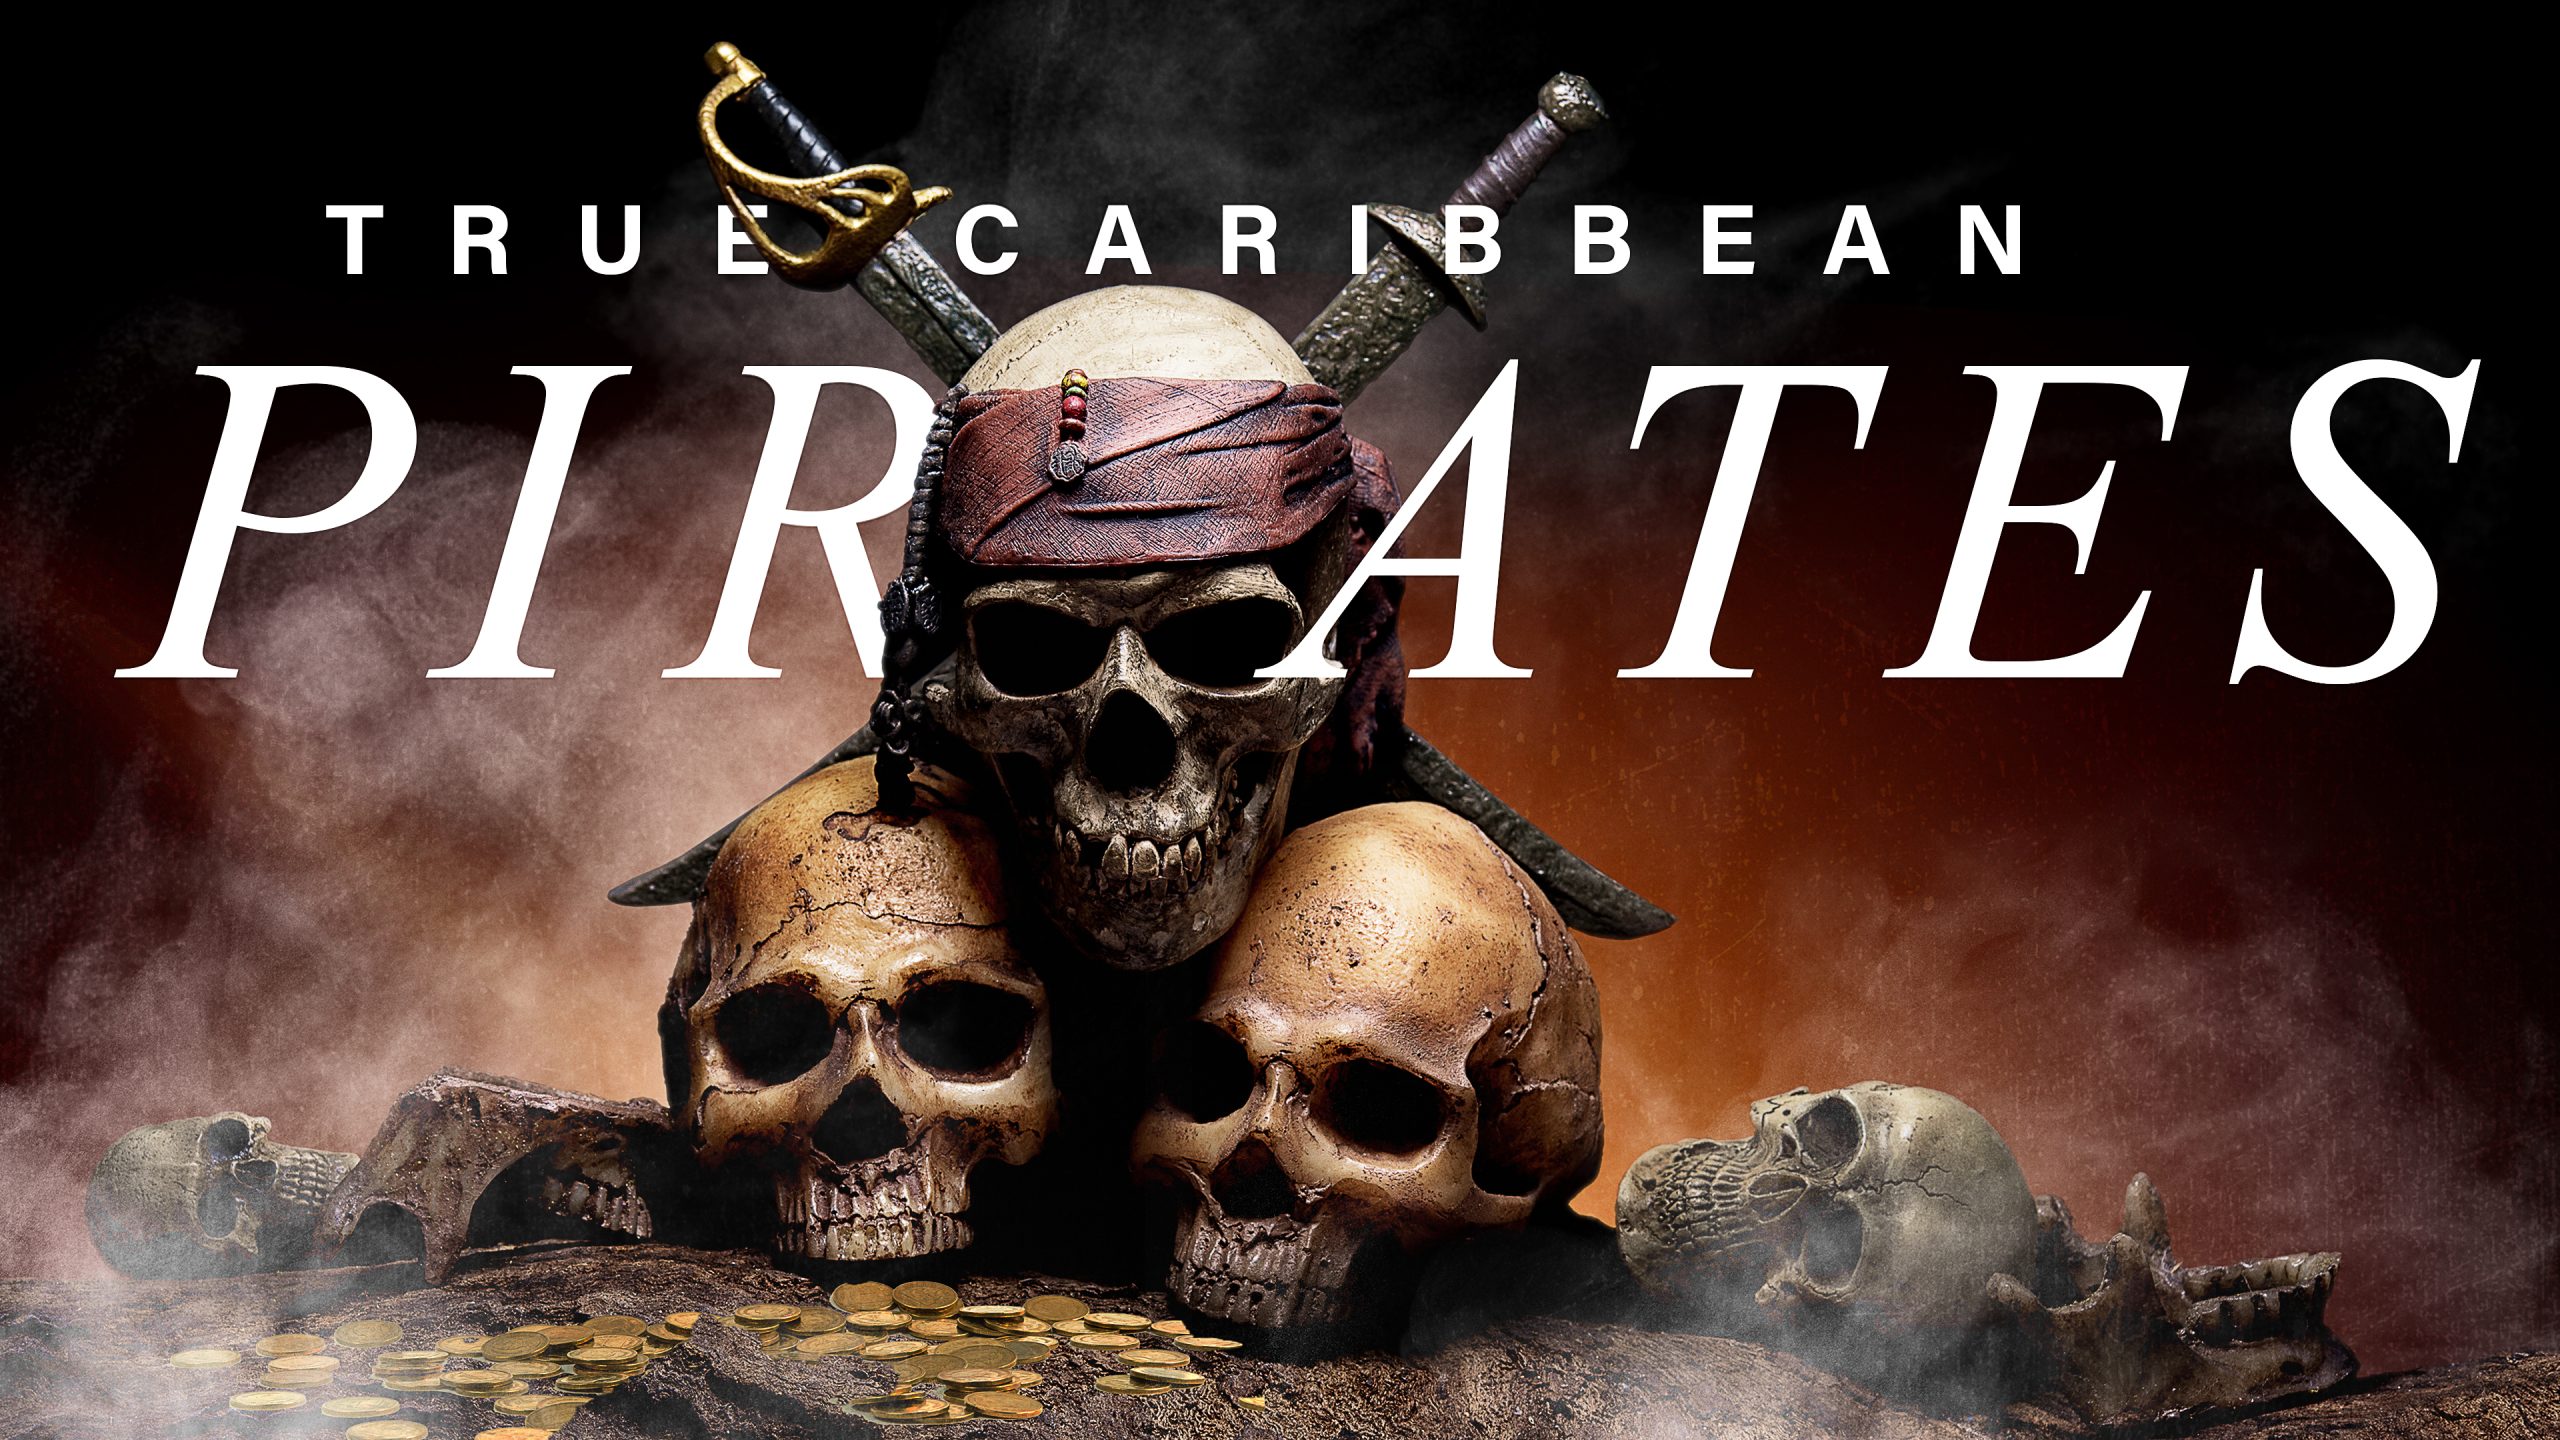 warch pirates of the caribbean 2 online free